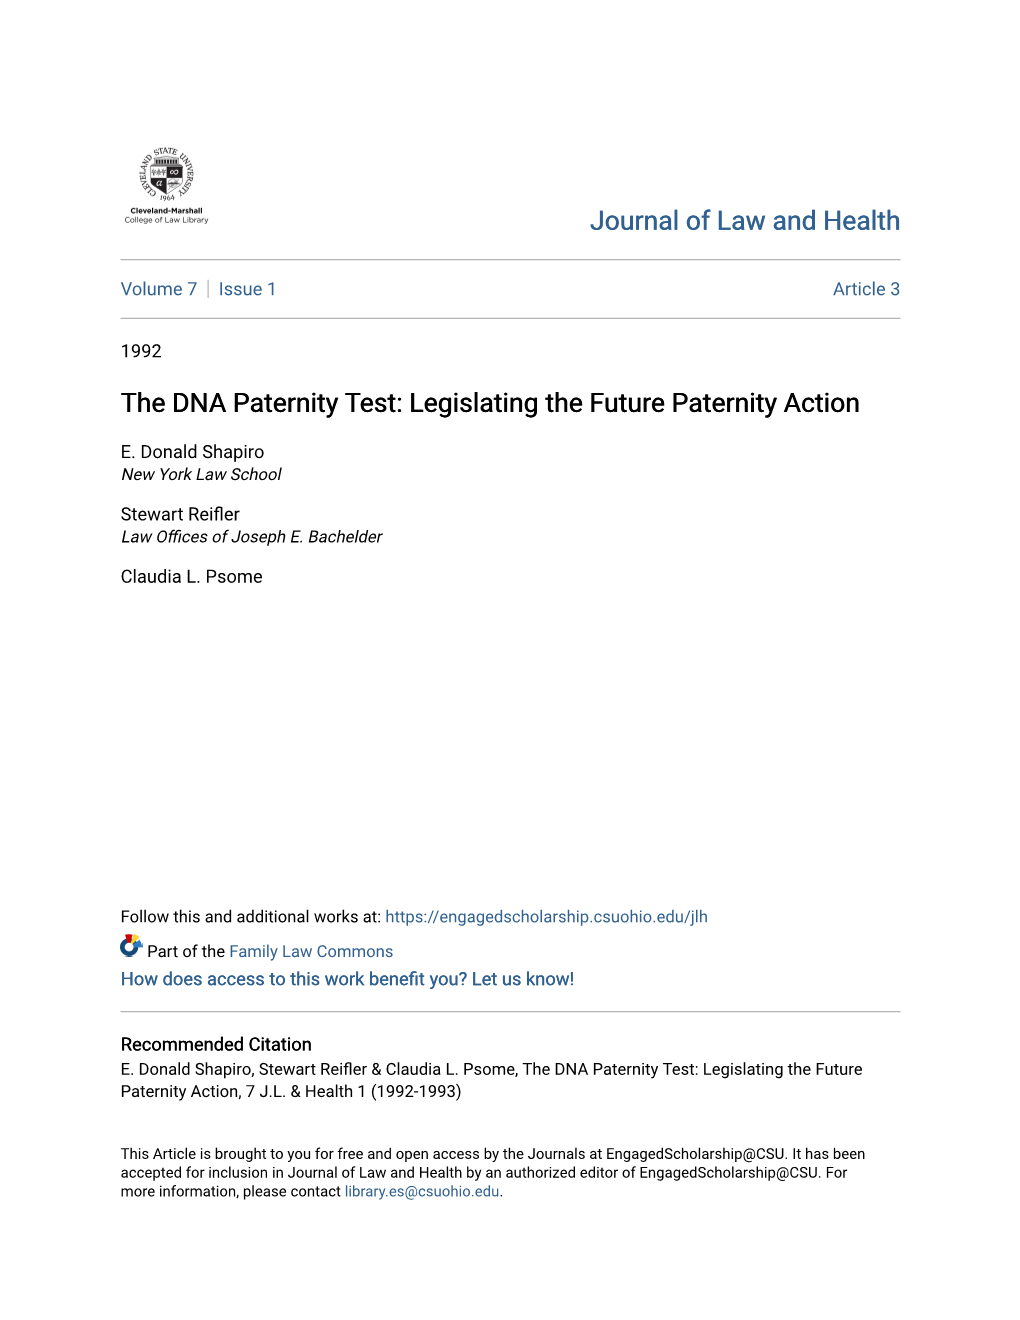 The DNA Paternity Test: Legislating the Future Paternity Action